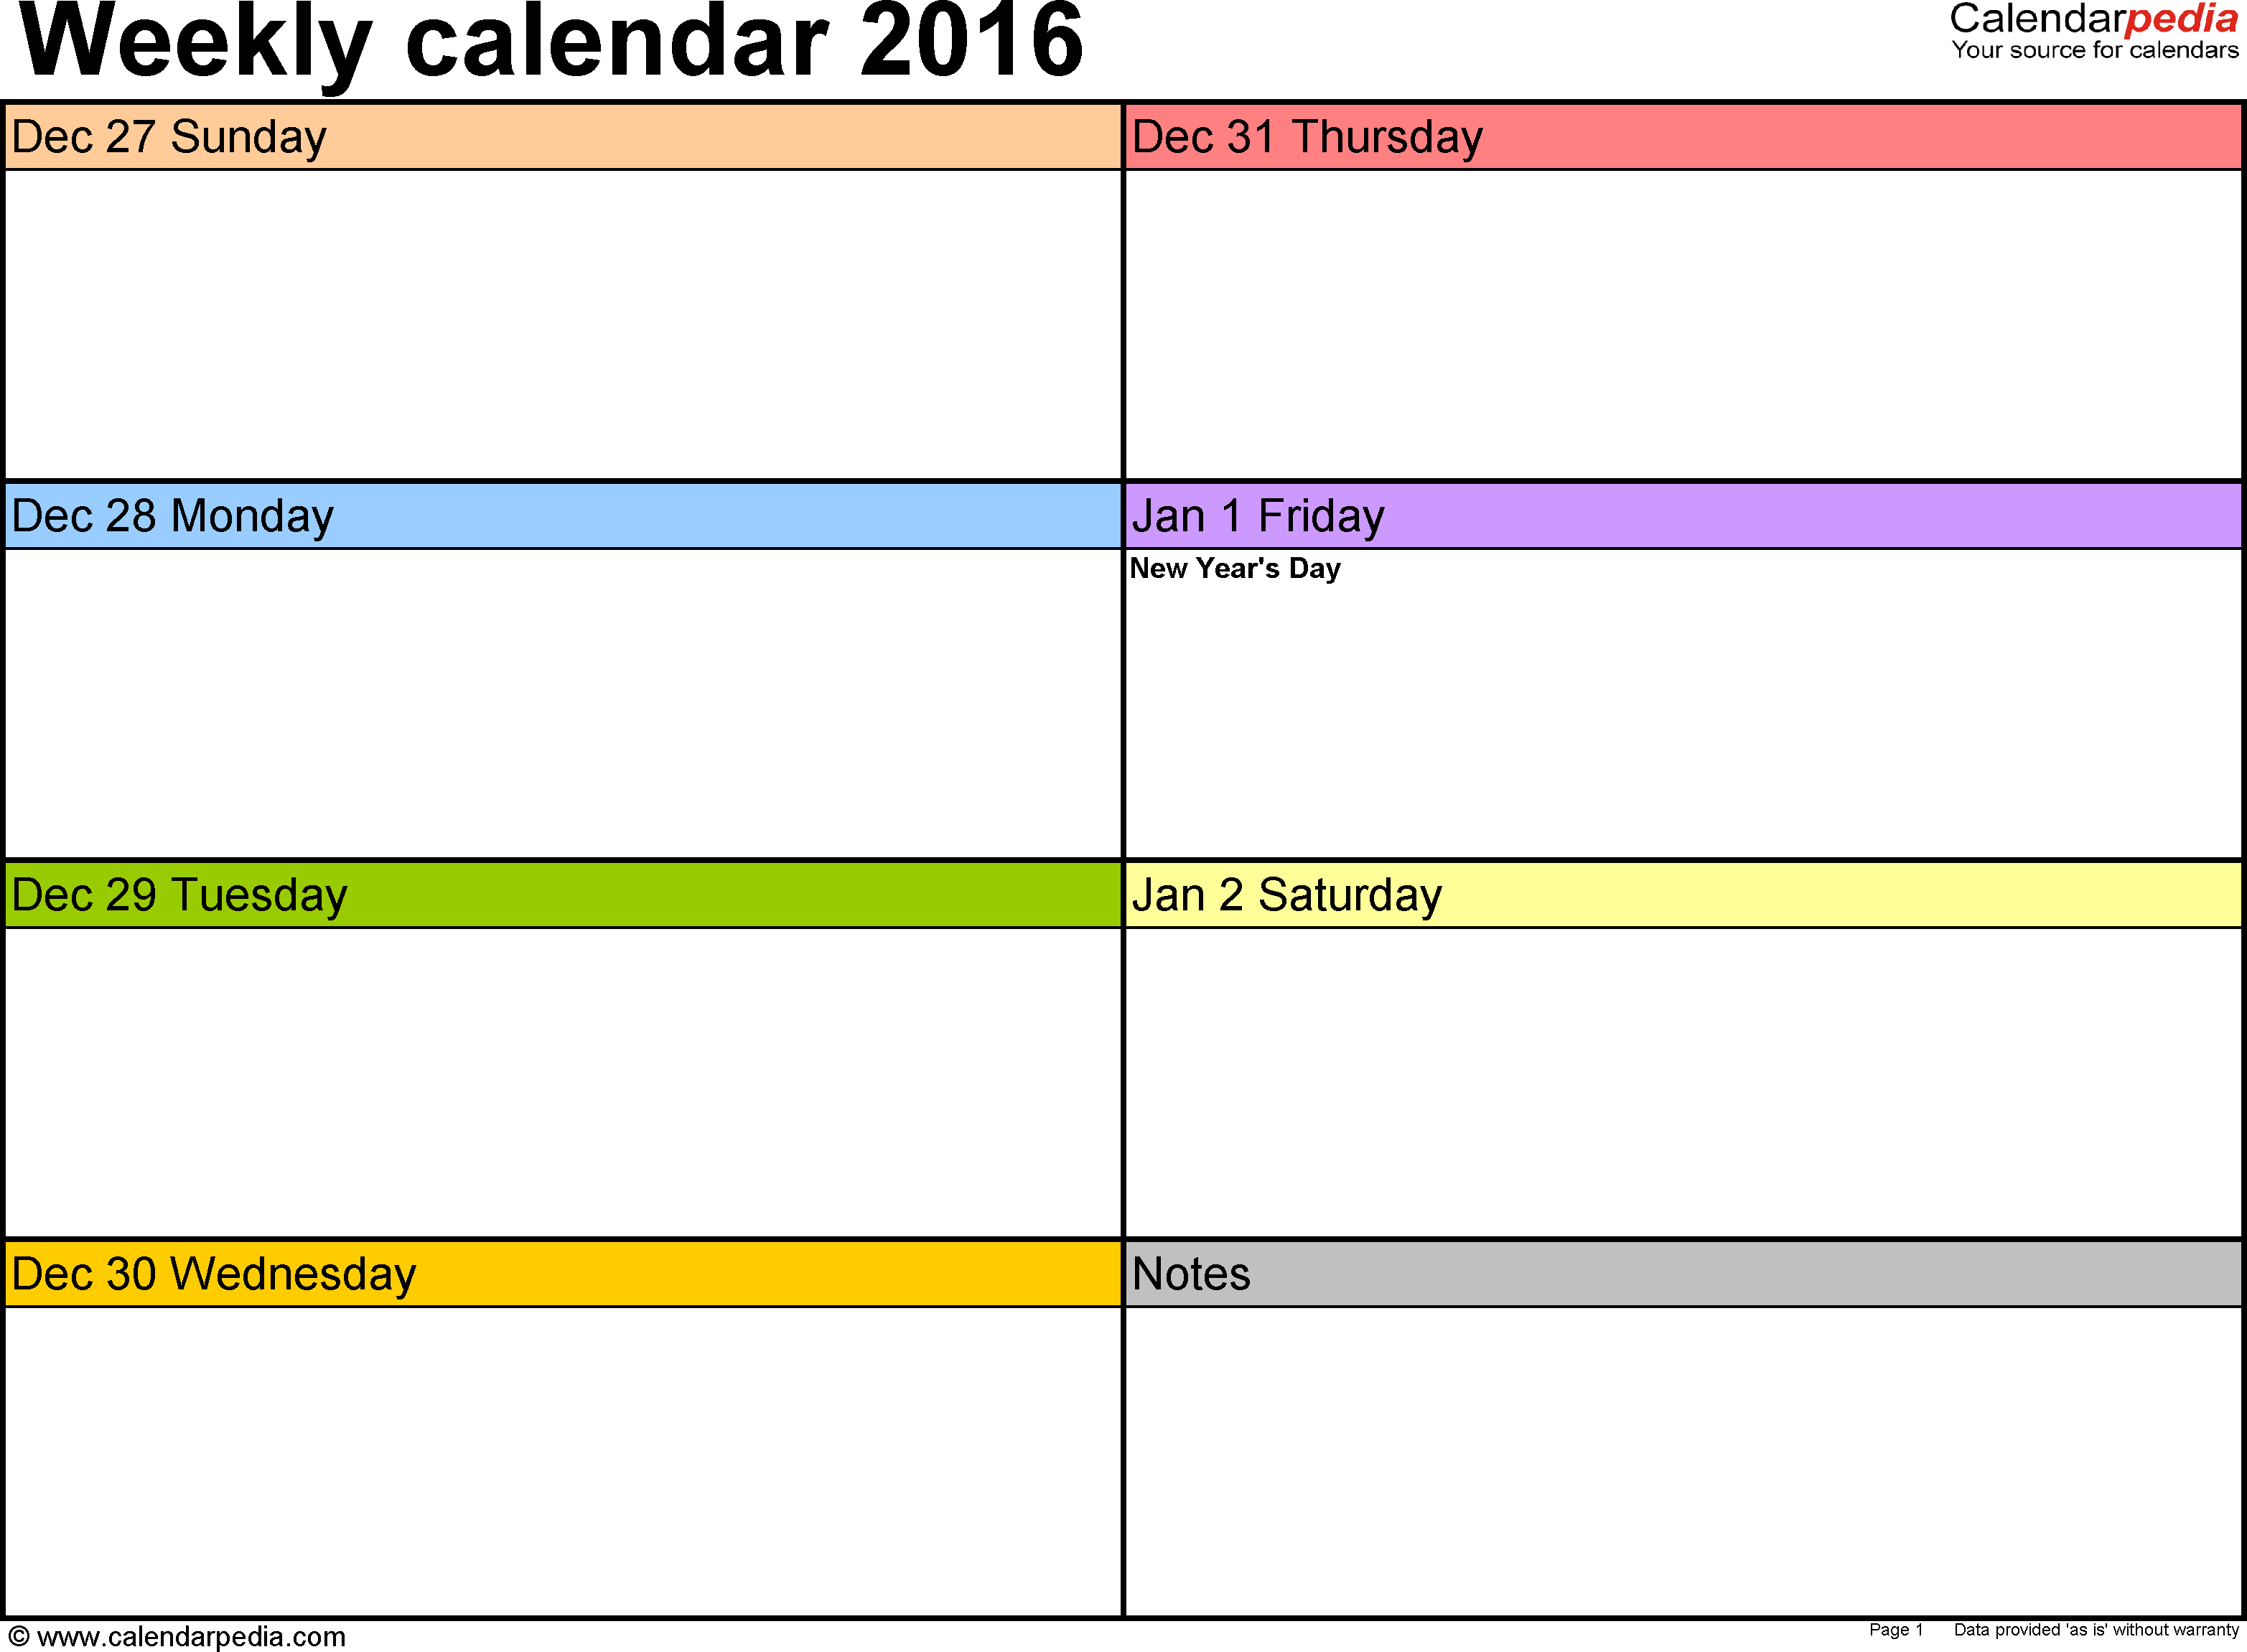 Weekly Calendar 2016 For Word - 12 Free Printable Templates